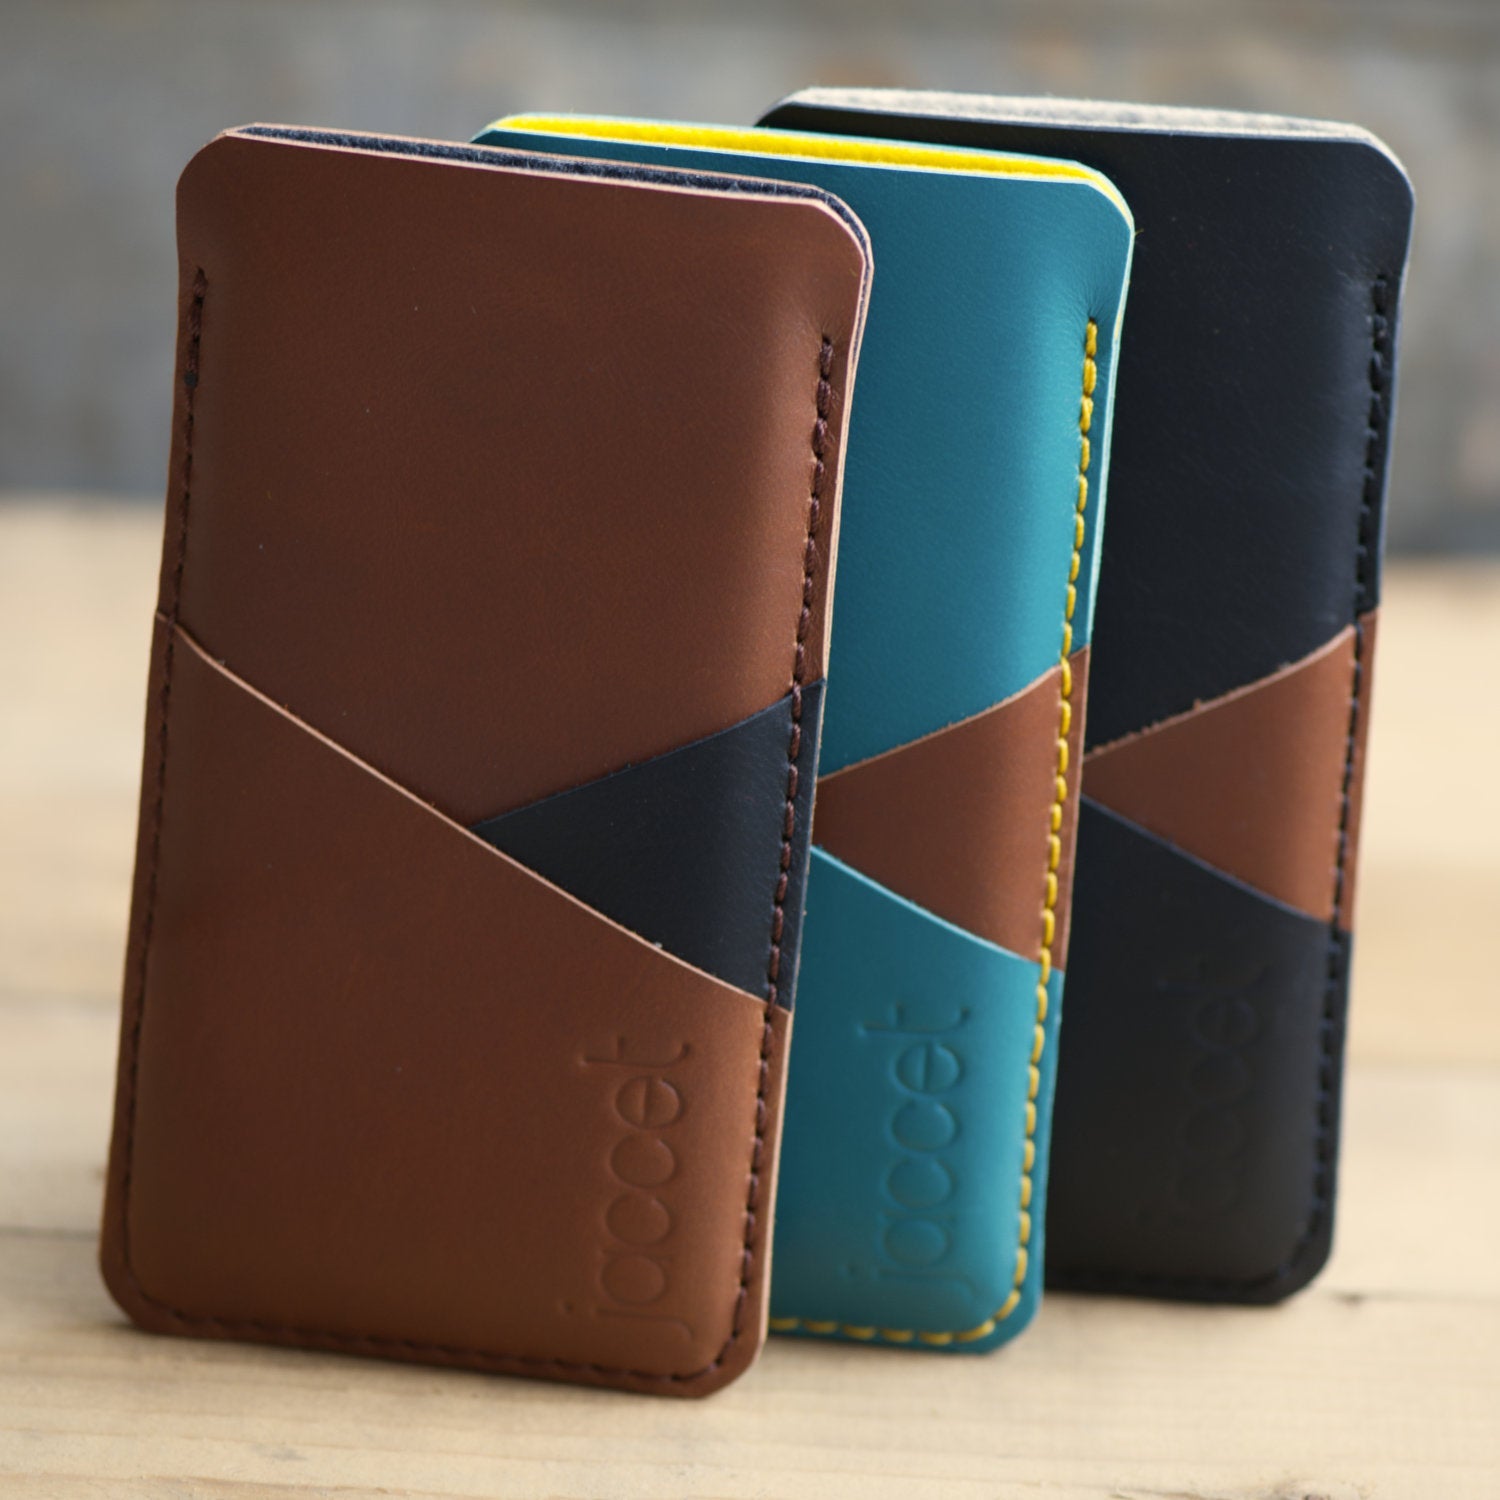 Full-grain leather Sony Xperia sleeve - Brown leather with two pockets voor cards